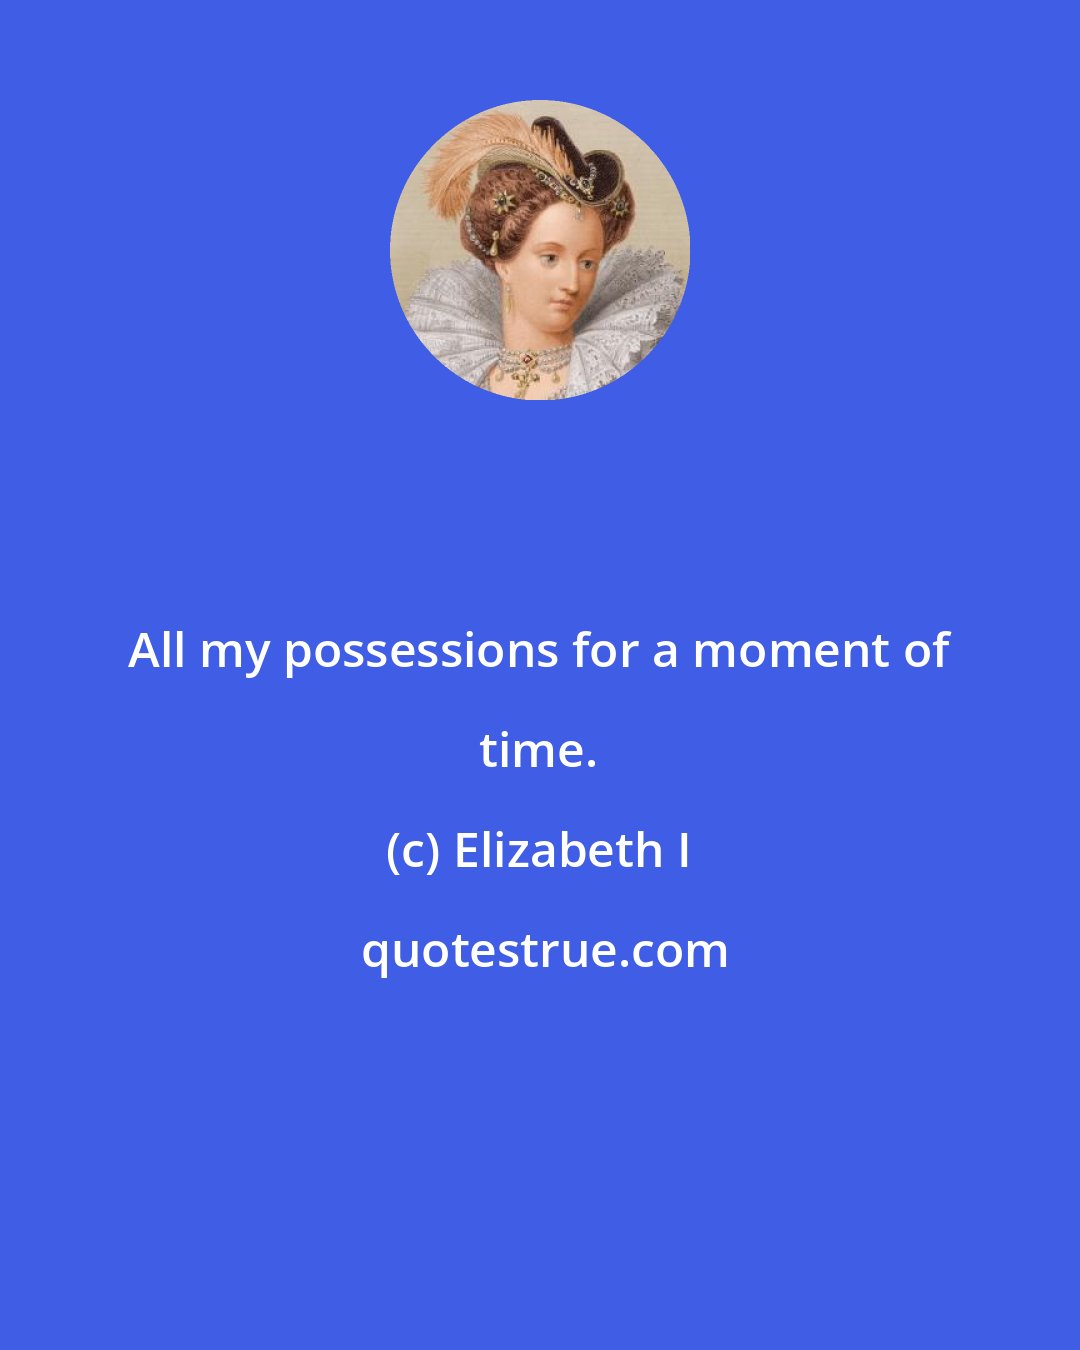 Elizabeth I: All my possessions for a moment of time.